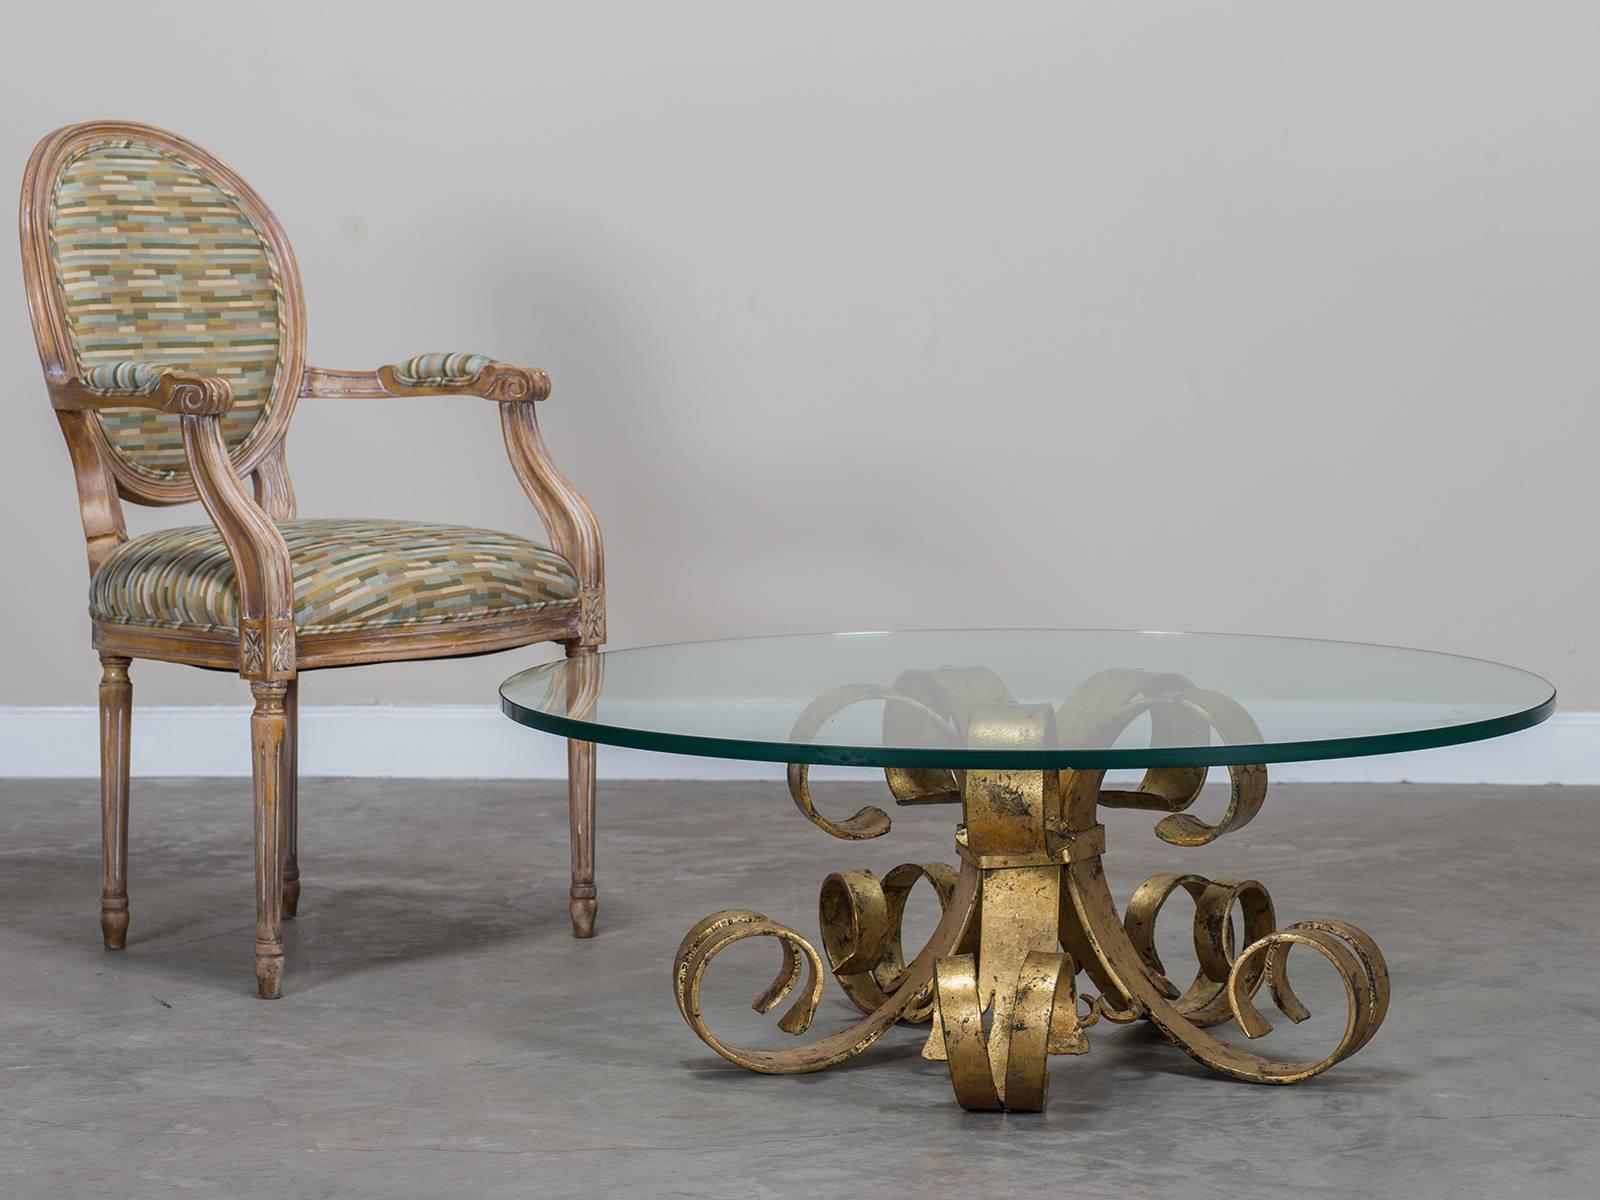 Receive our new selections direct from 1stdibs by email each week. Please click Follow Dealer below and see them first!

The extravagant flared shape of this vintage French cocktail table circa 1920 makes a powerful visual statement. Five iron